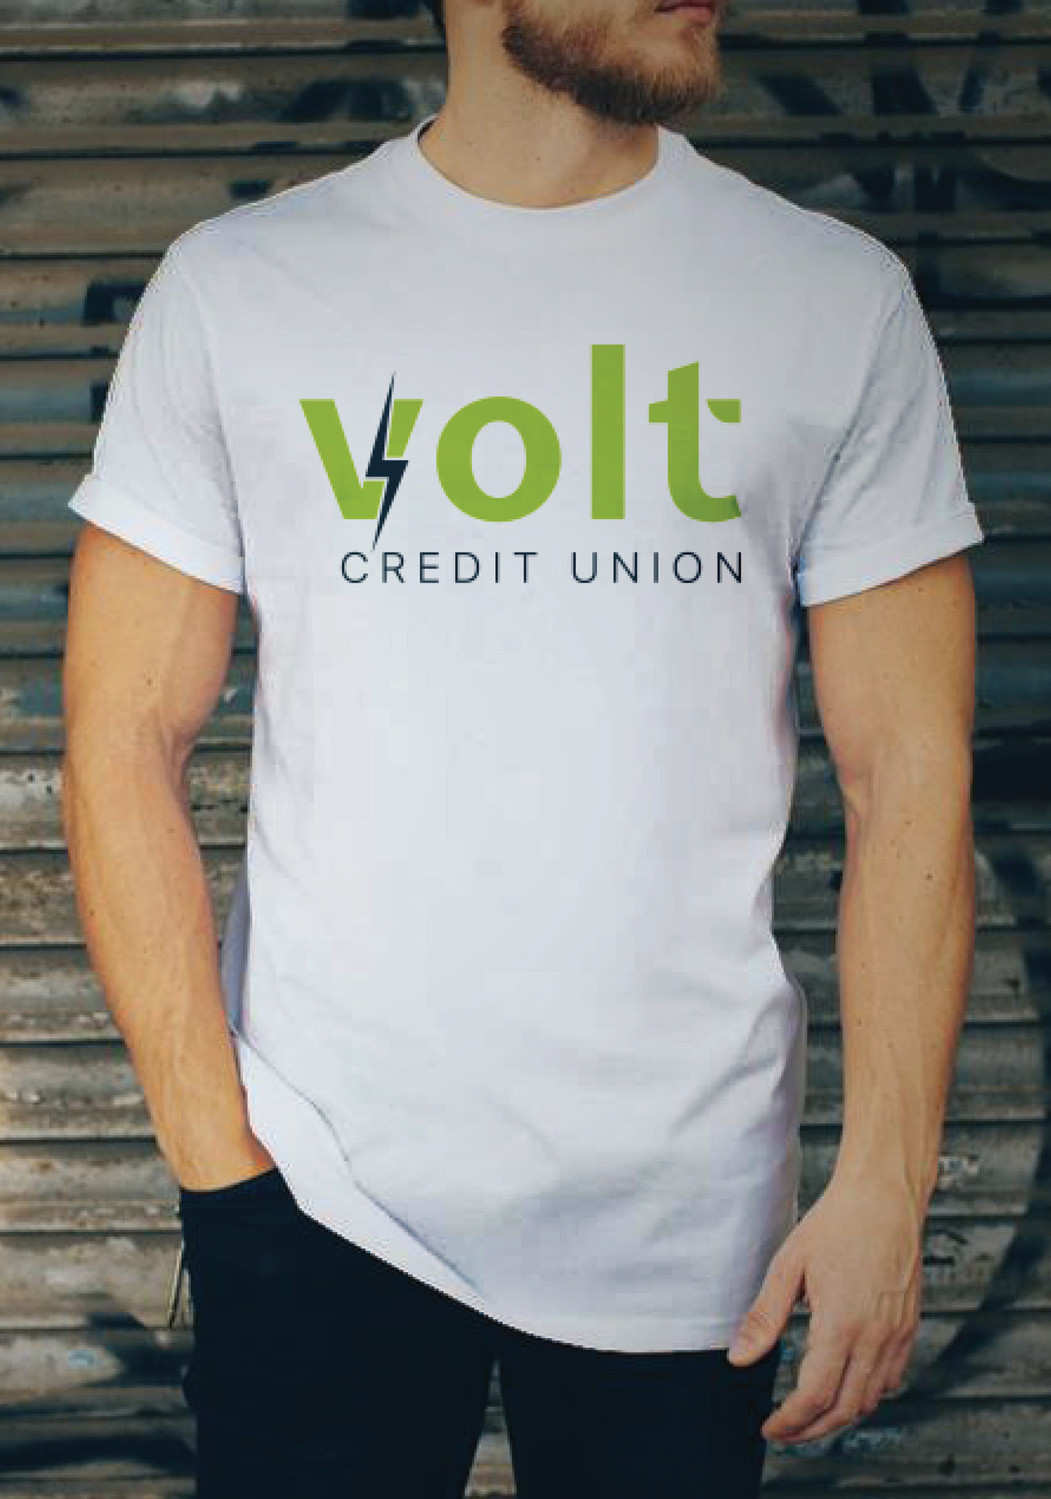 Volt Credit Union employees will wear T-shirts and tennis shoes as part of the “Revolt” campaign.